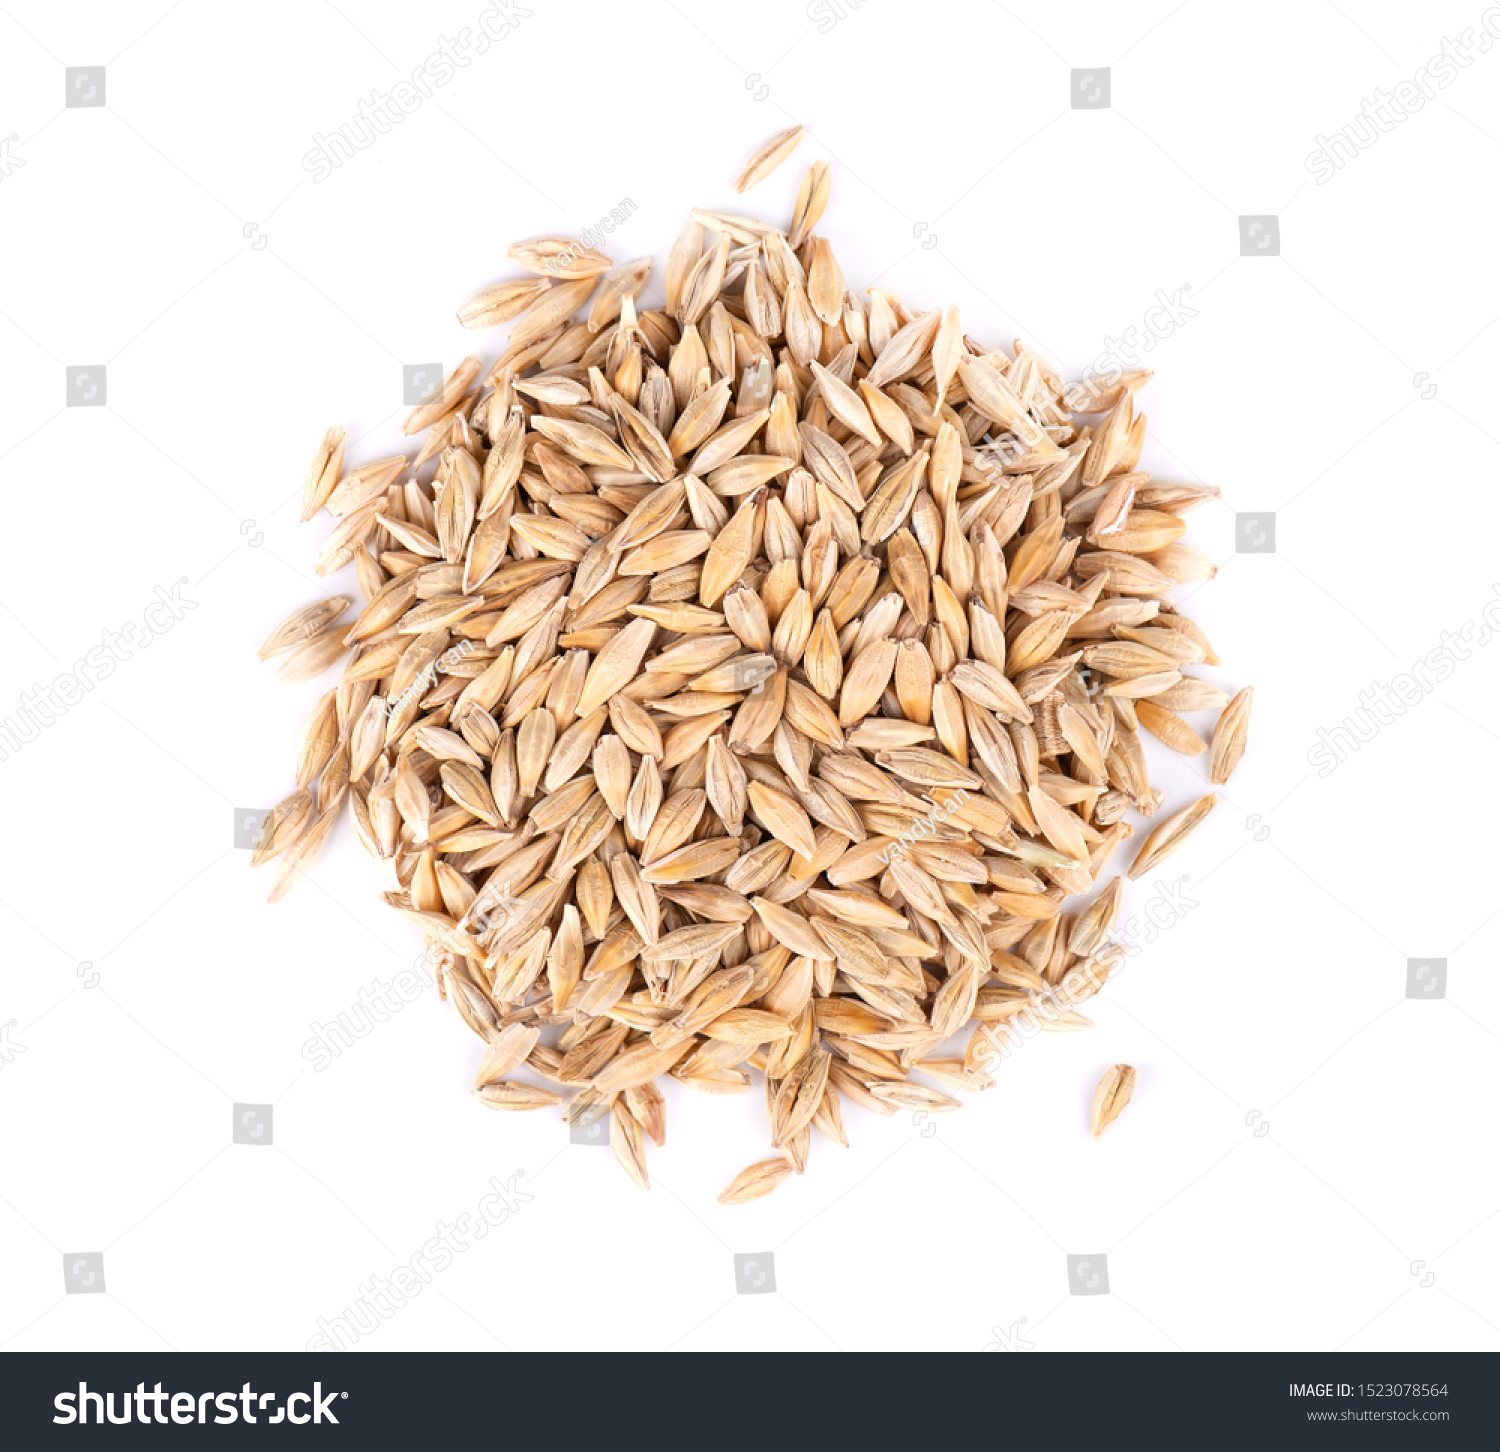 Malted barley grains, isolated on white background. Barley seed close up. Top view. Macro. #1523078564